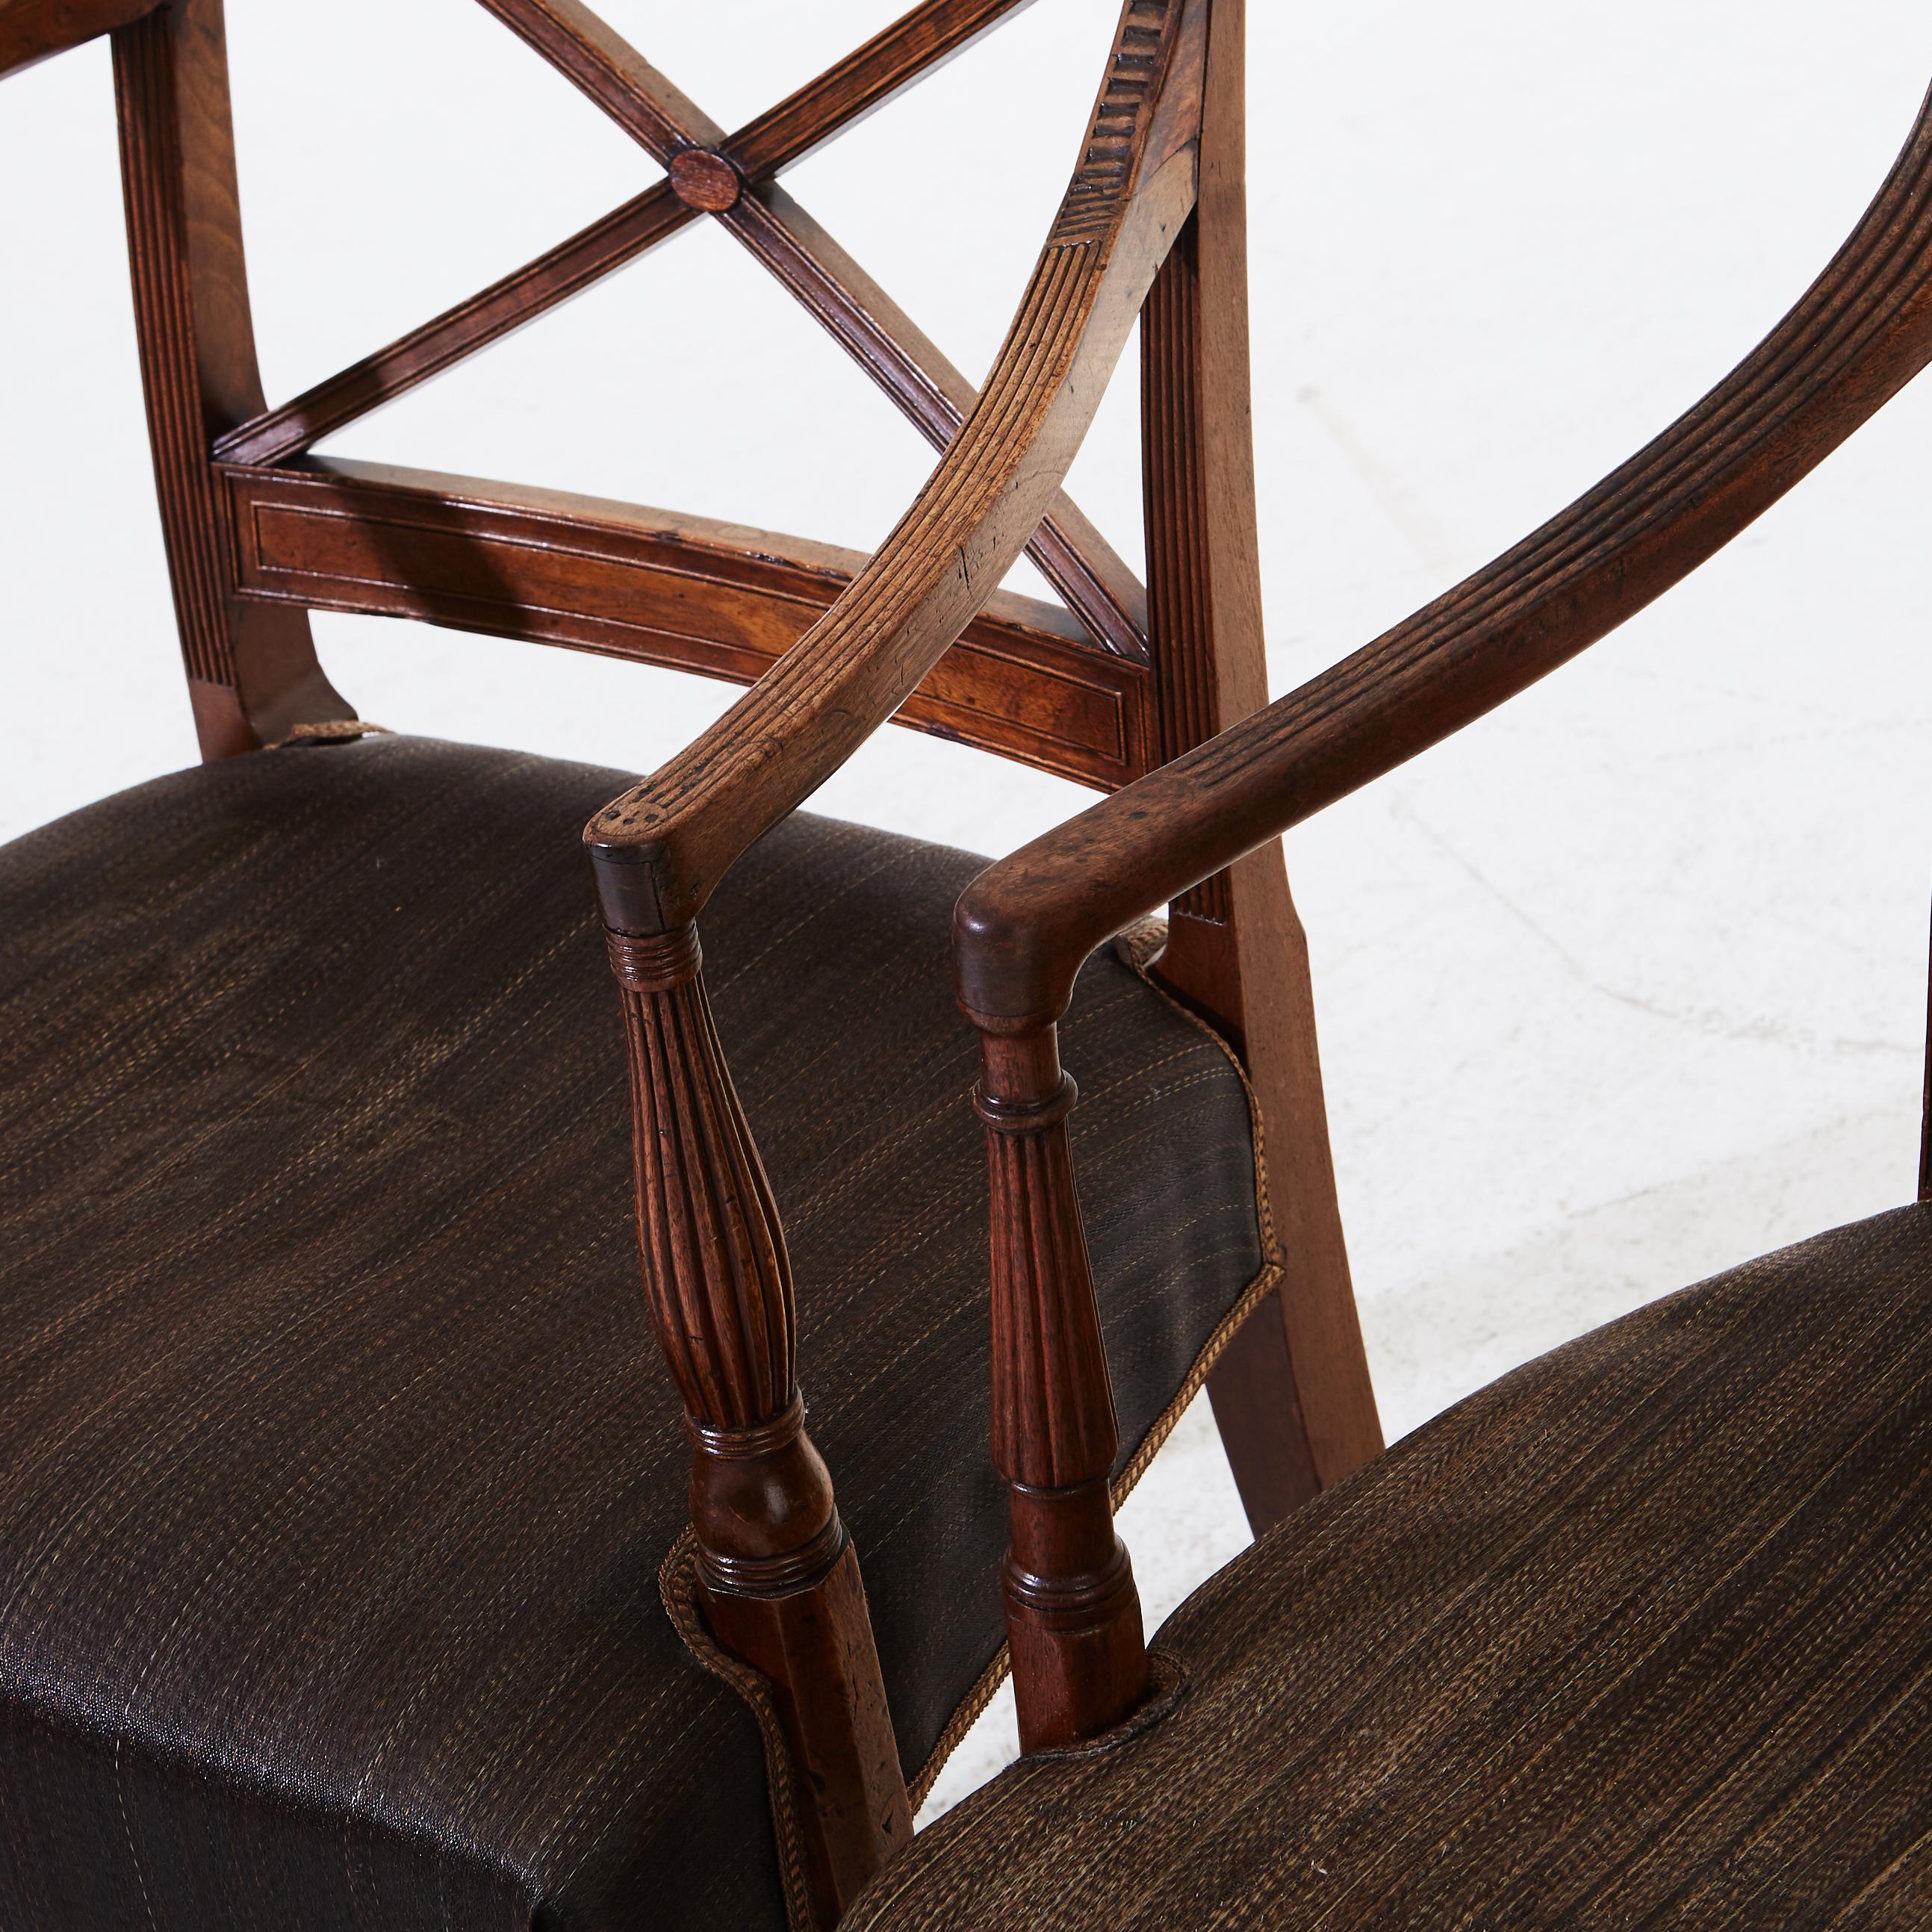 English Pair of Regency Mahogany Arm Chairs, with Original Horsehair Upholstery